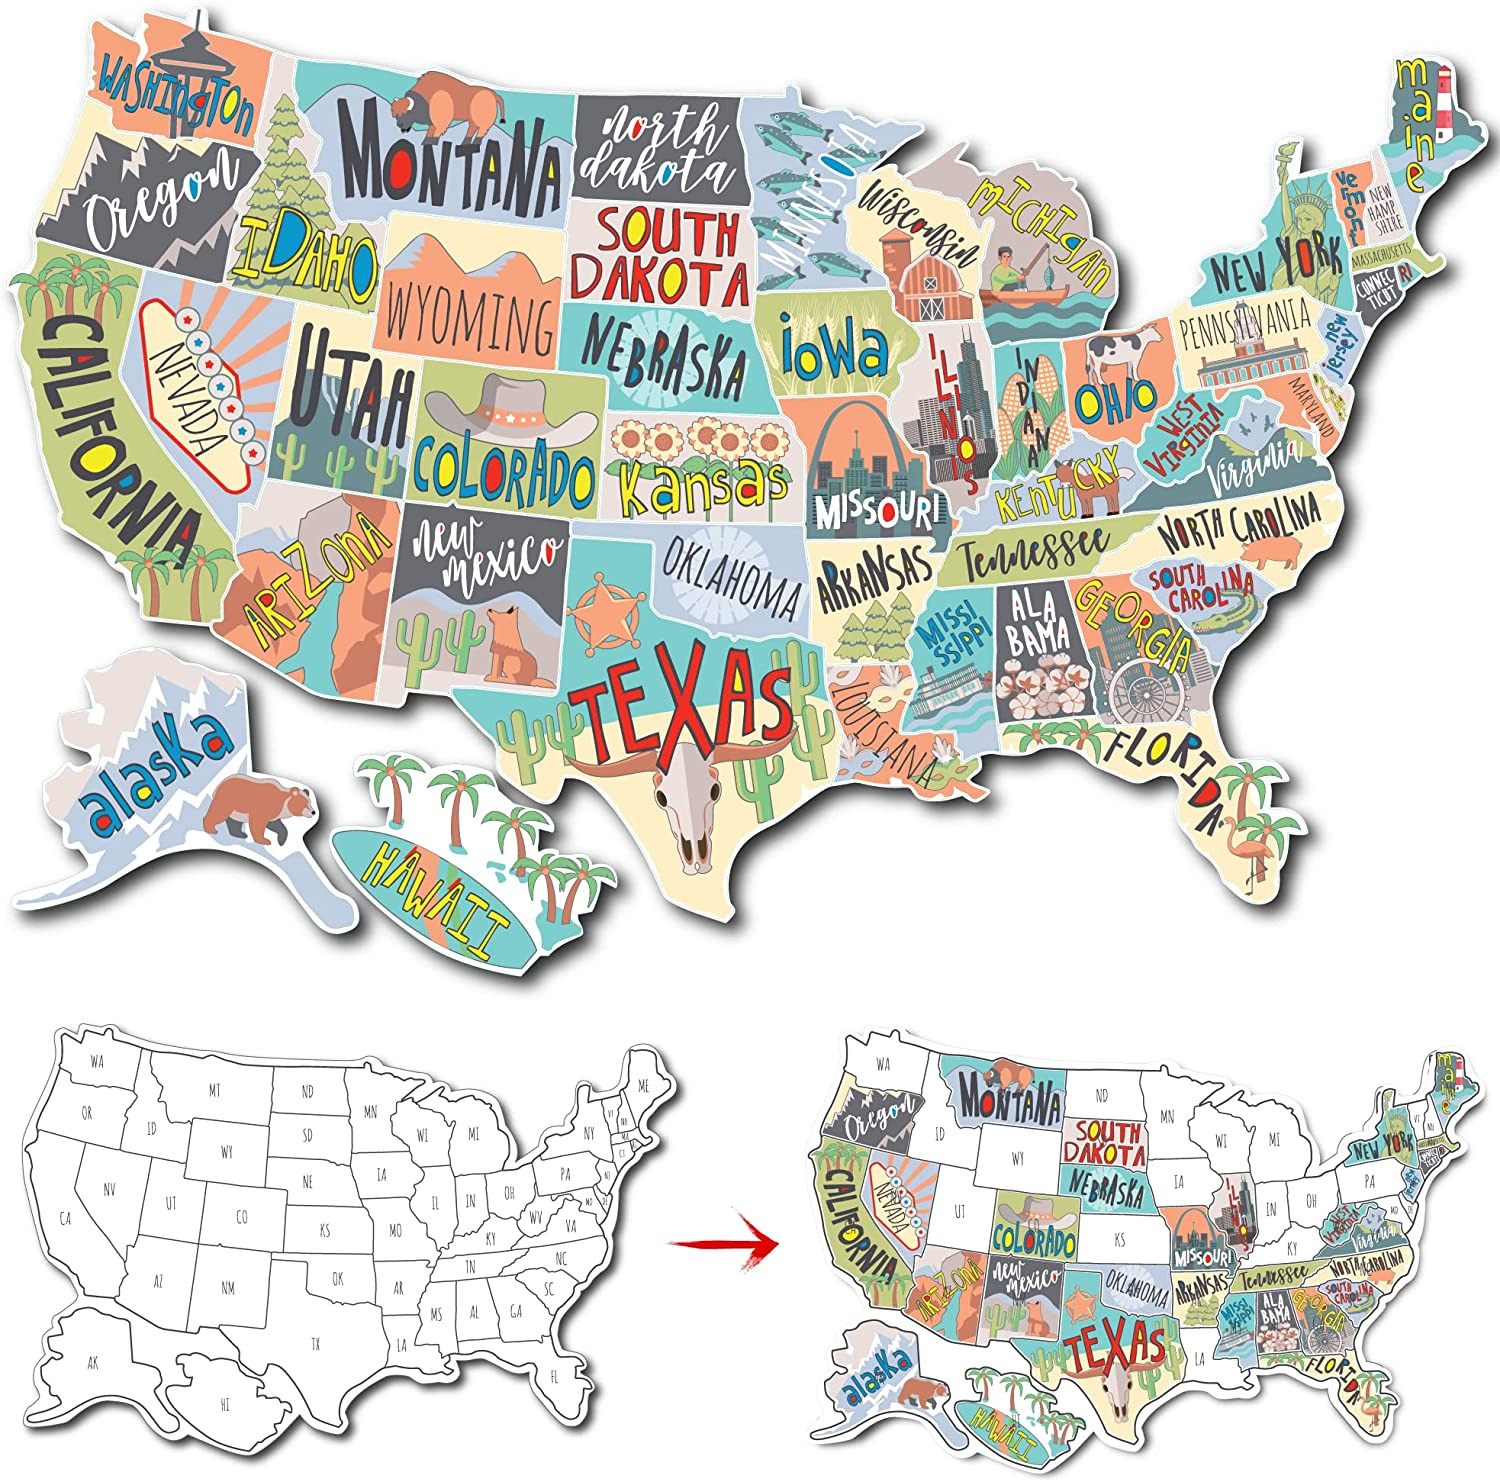 RV State Sticker Travel Map of the United States | 50 States Stickers of US | Vi